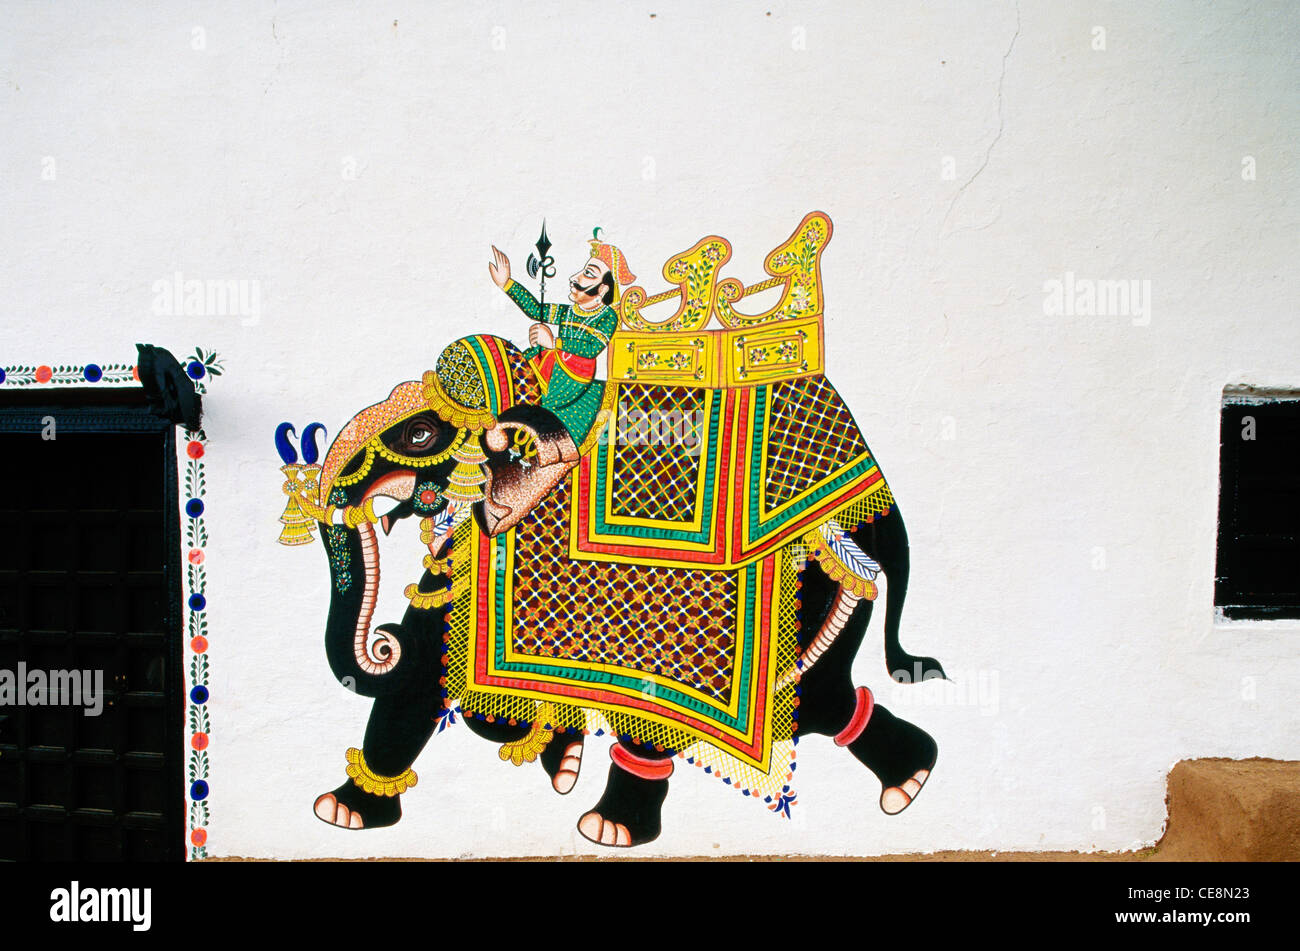 AAD 80020 : indian Wall Painting of decorated elephant rajasthan india Stock Photo